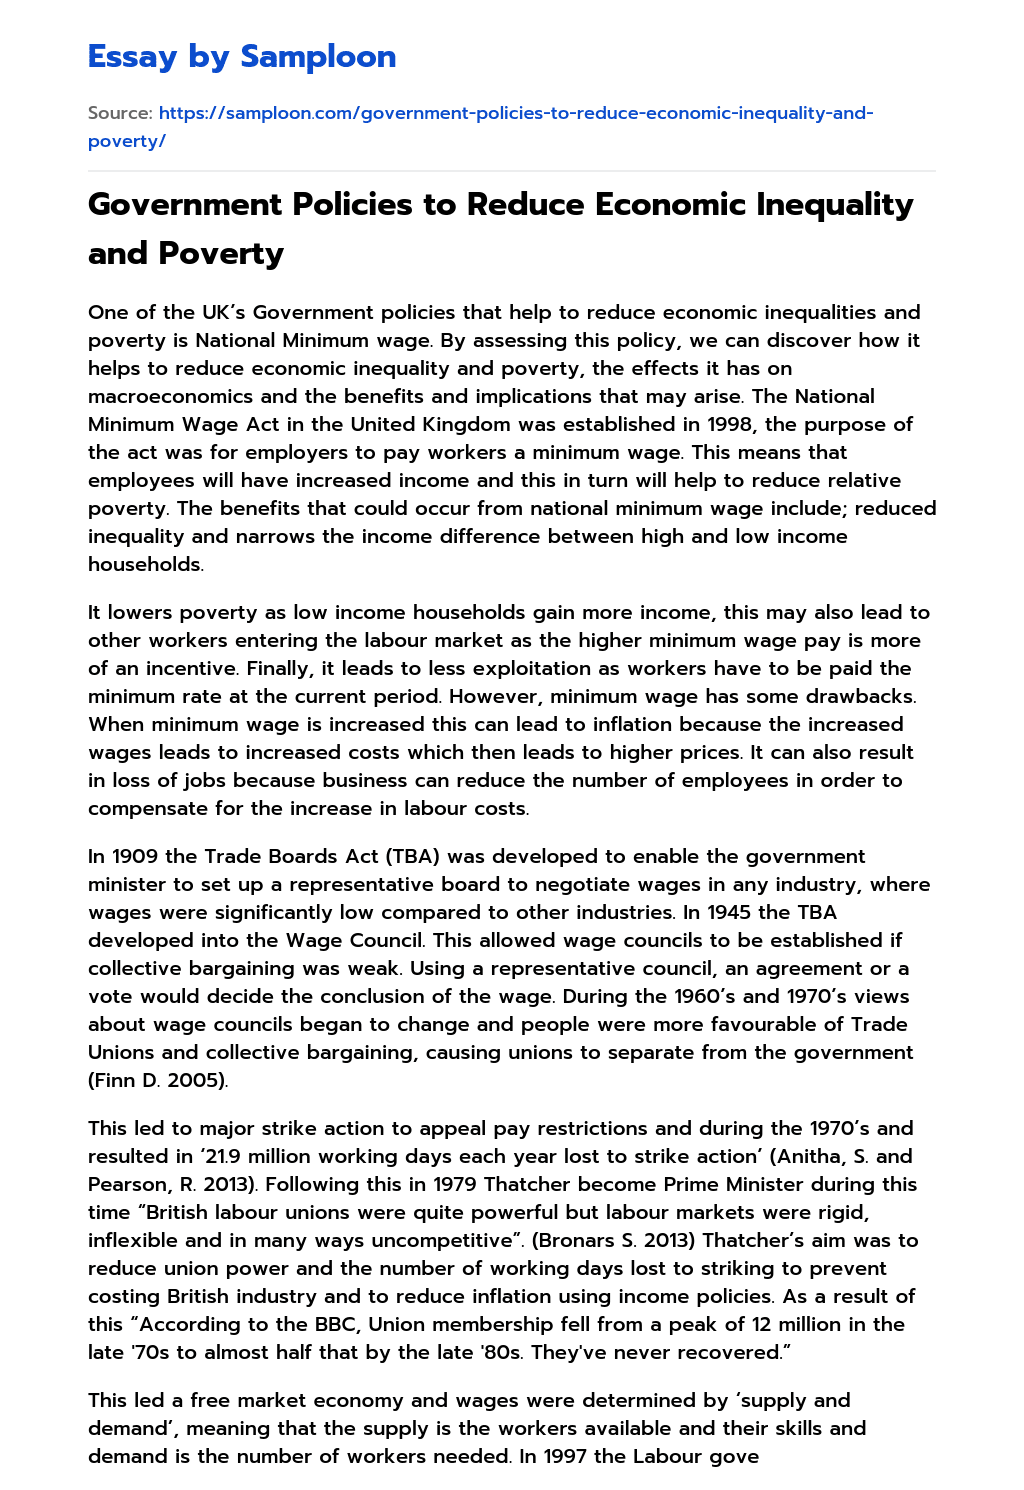 Government Policies to Reduce Economic Inequality and Poverty essay